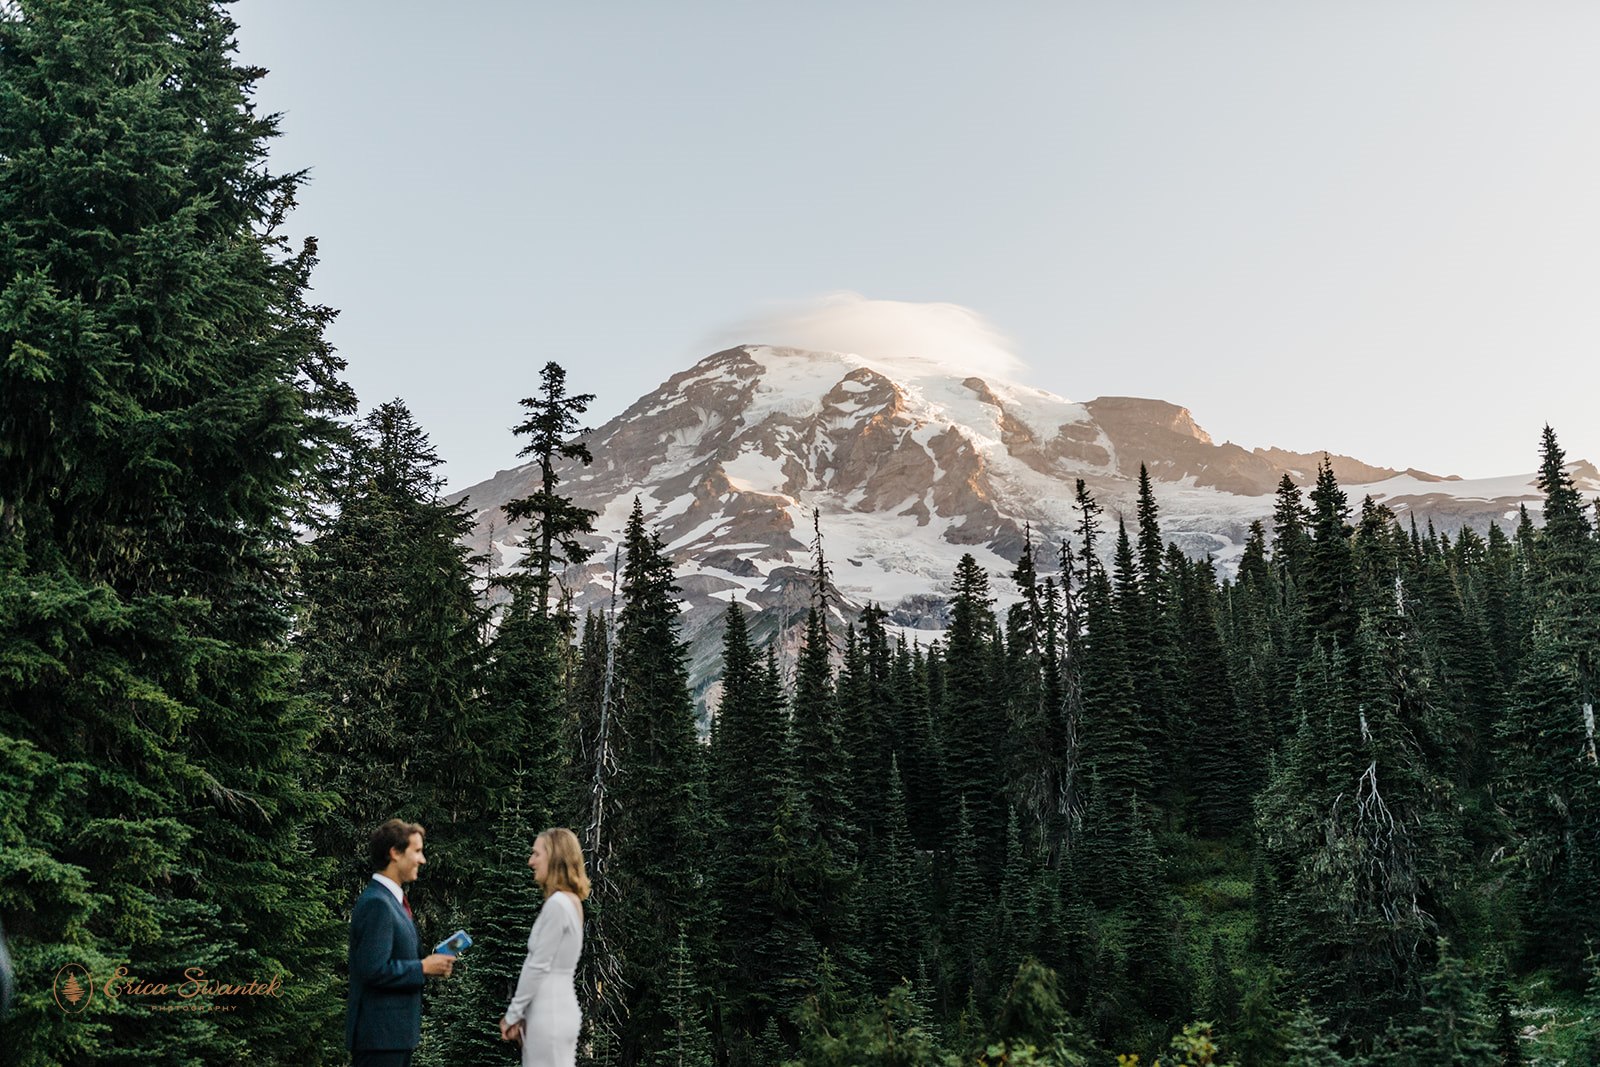 A Mt. Rainier elopement couple recites vows in the National Park at Sunset.